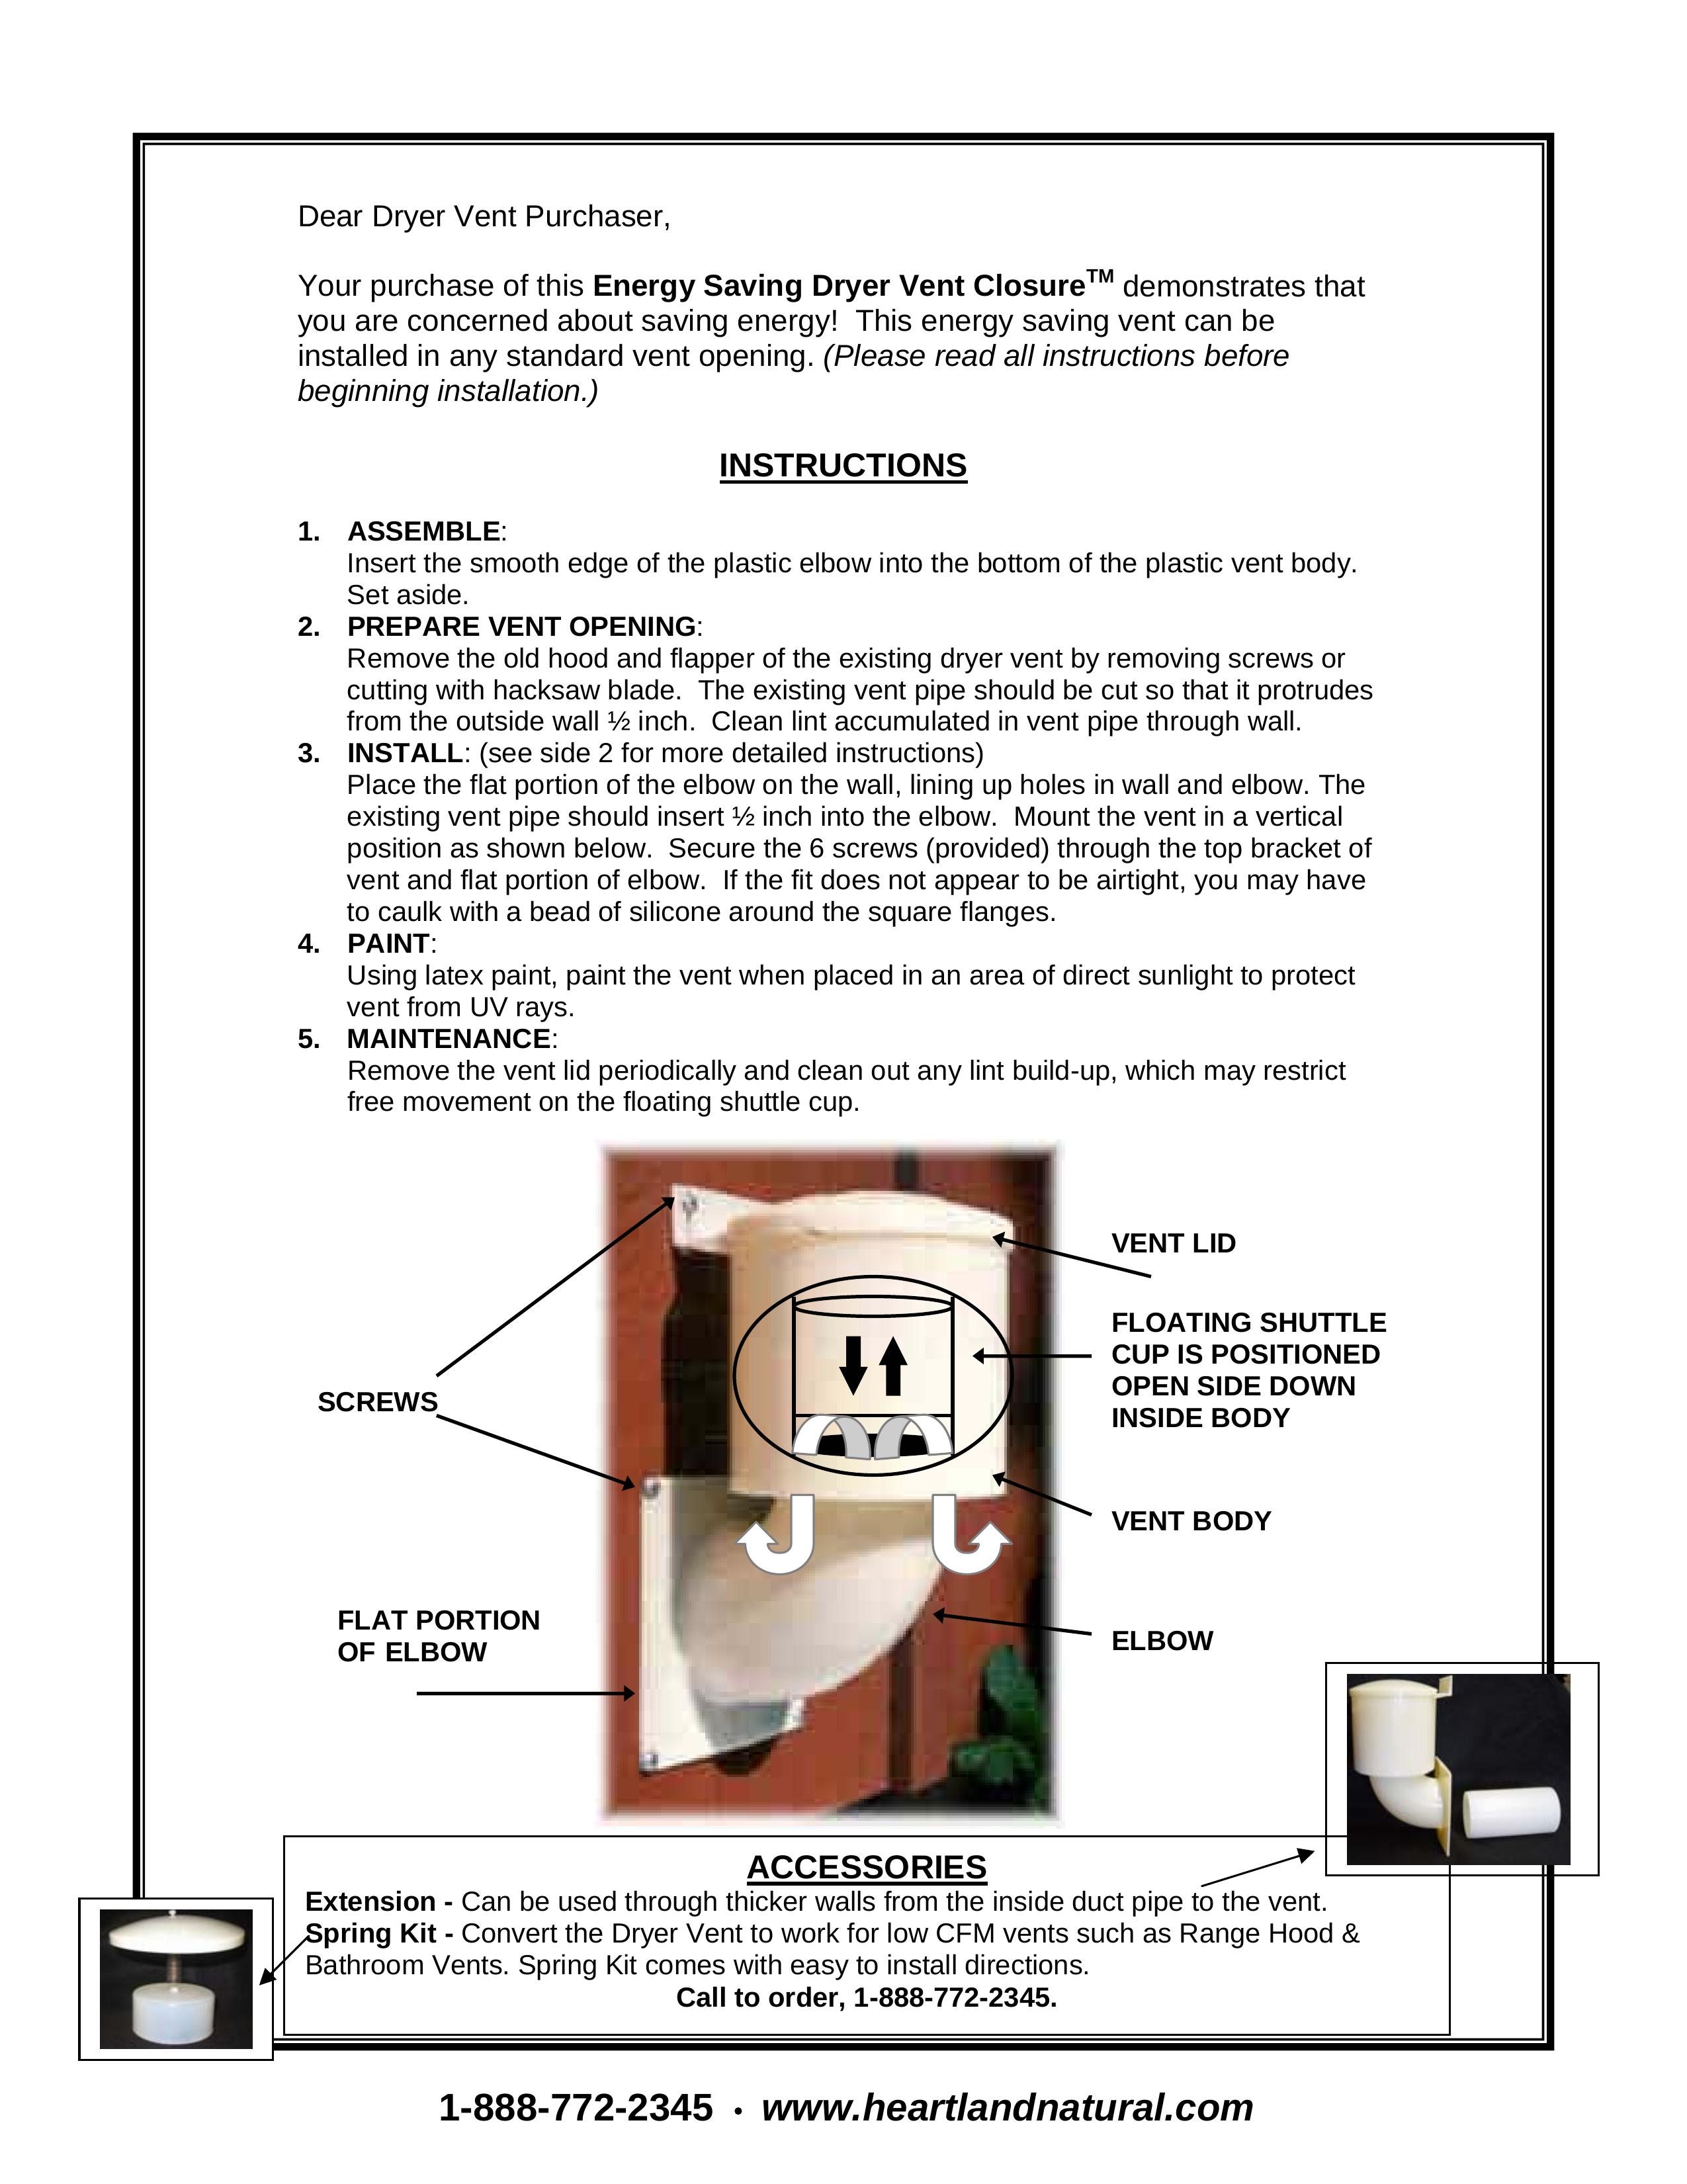 Heartland 21000 Dryer Accessories User Manual (Page 1)